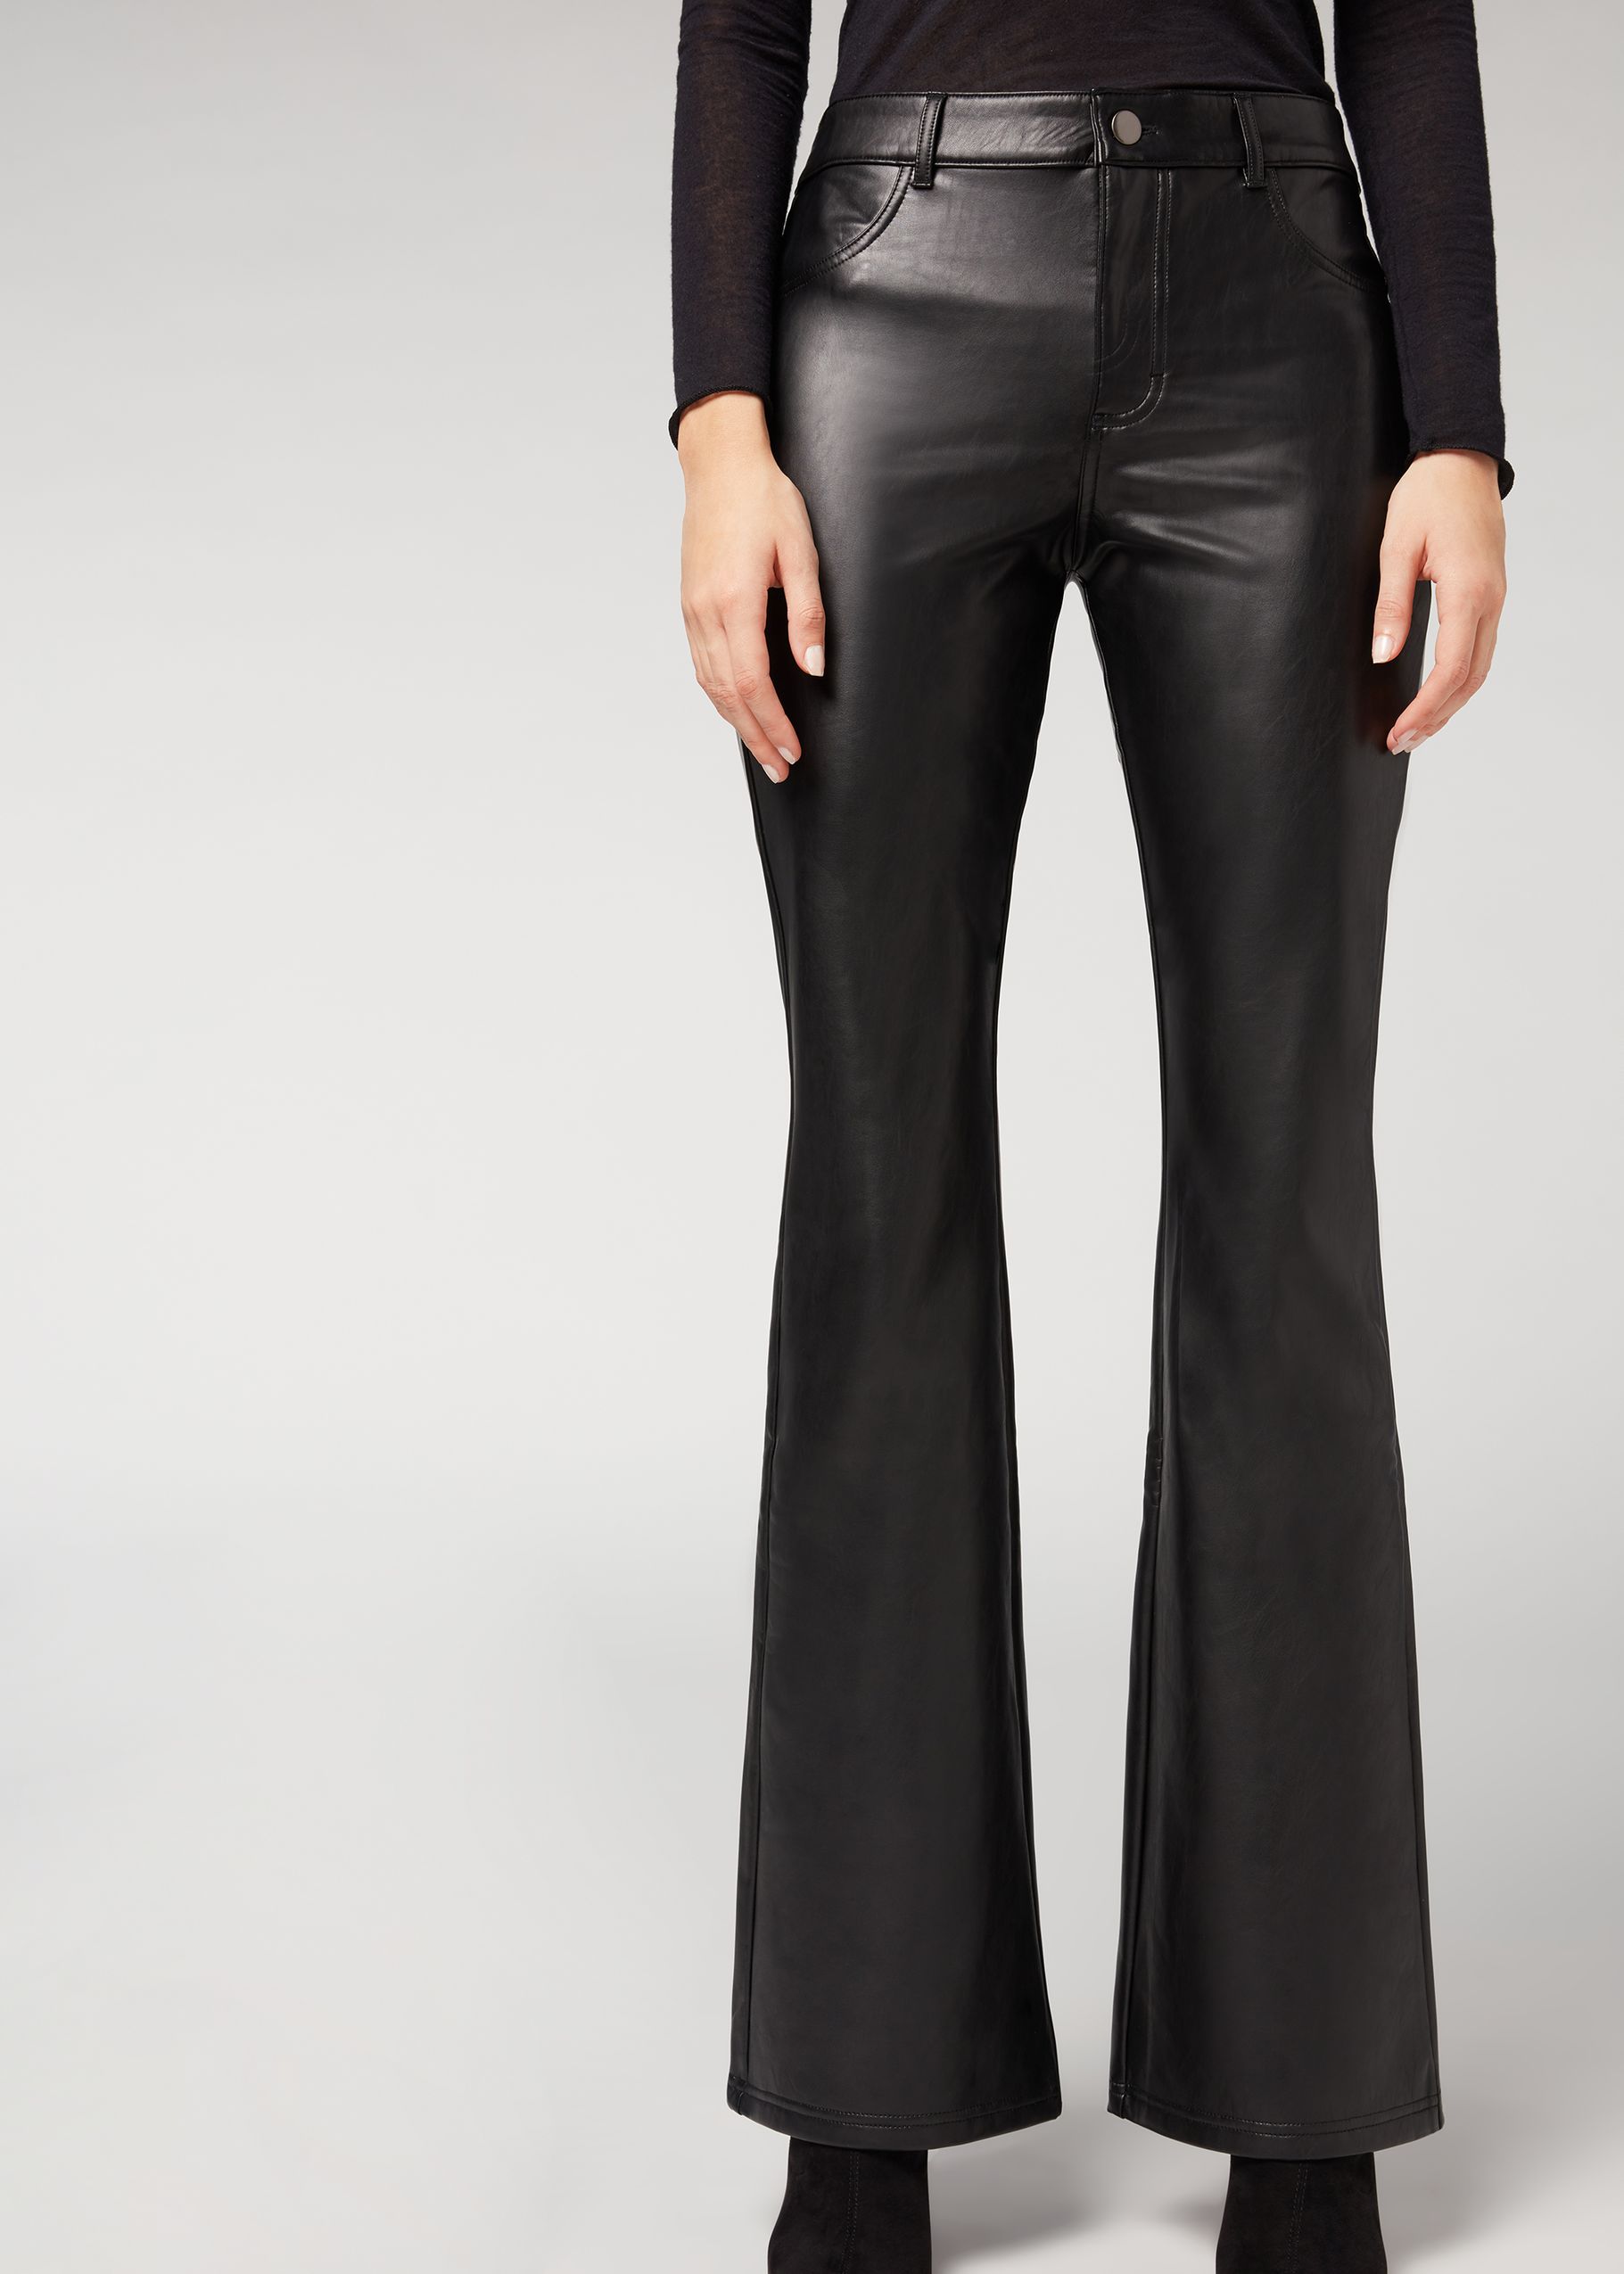 Leather Effect Thermal Flare Leggings - Calzedonia | Calzedonia US